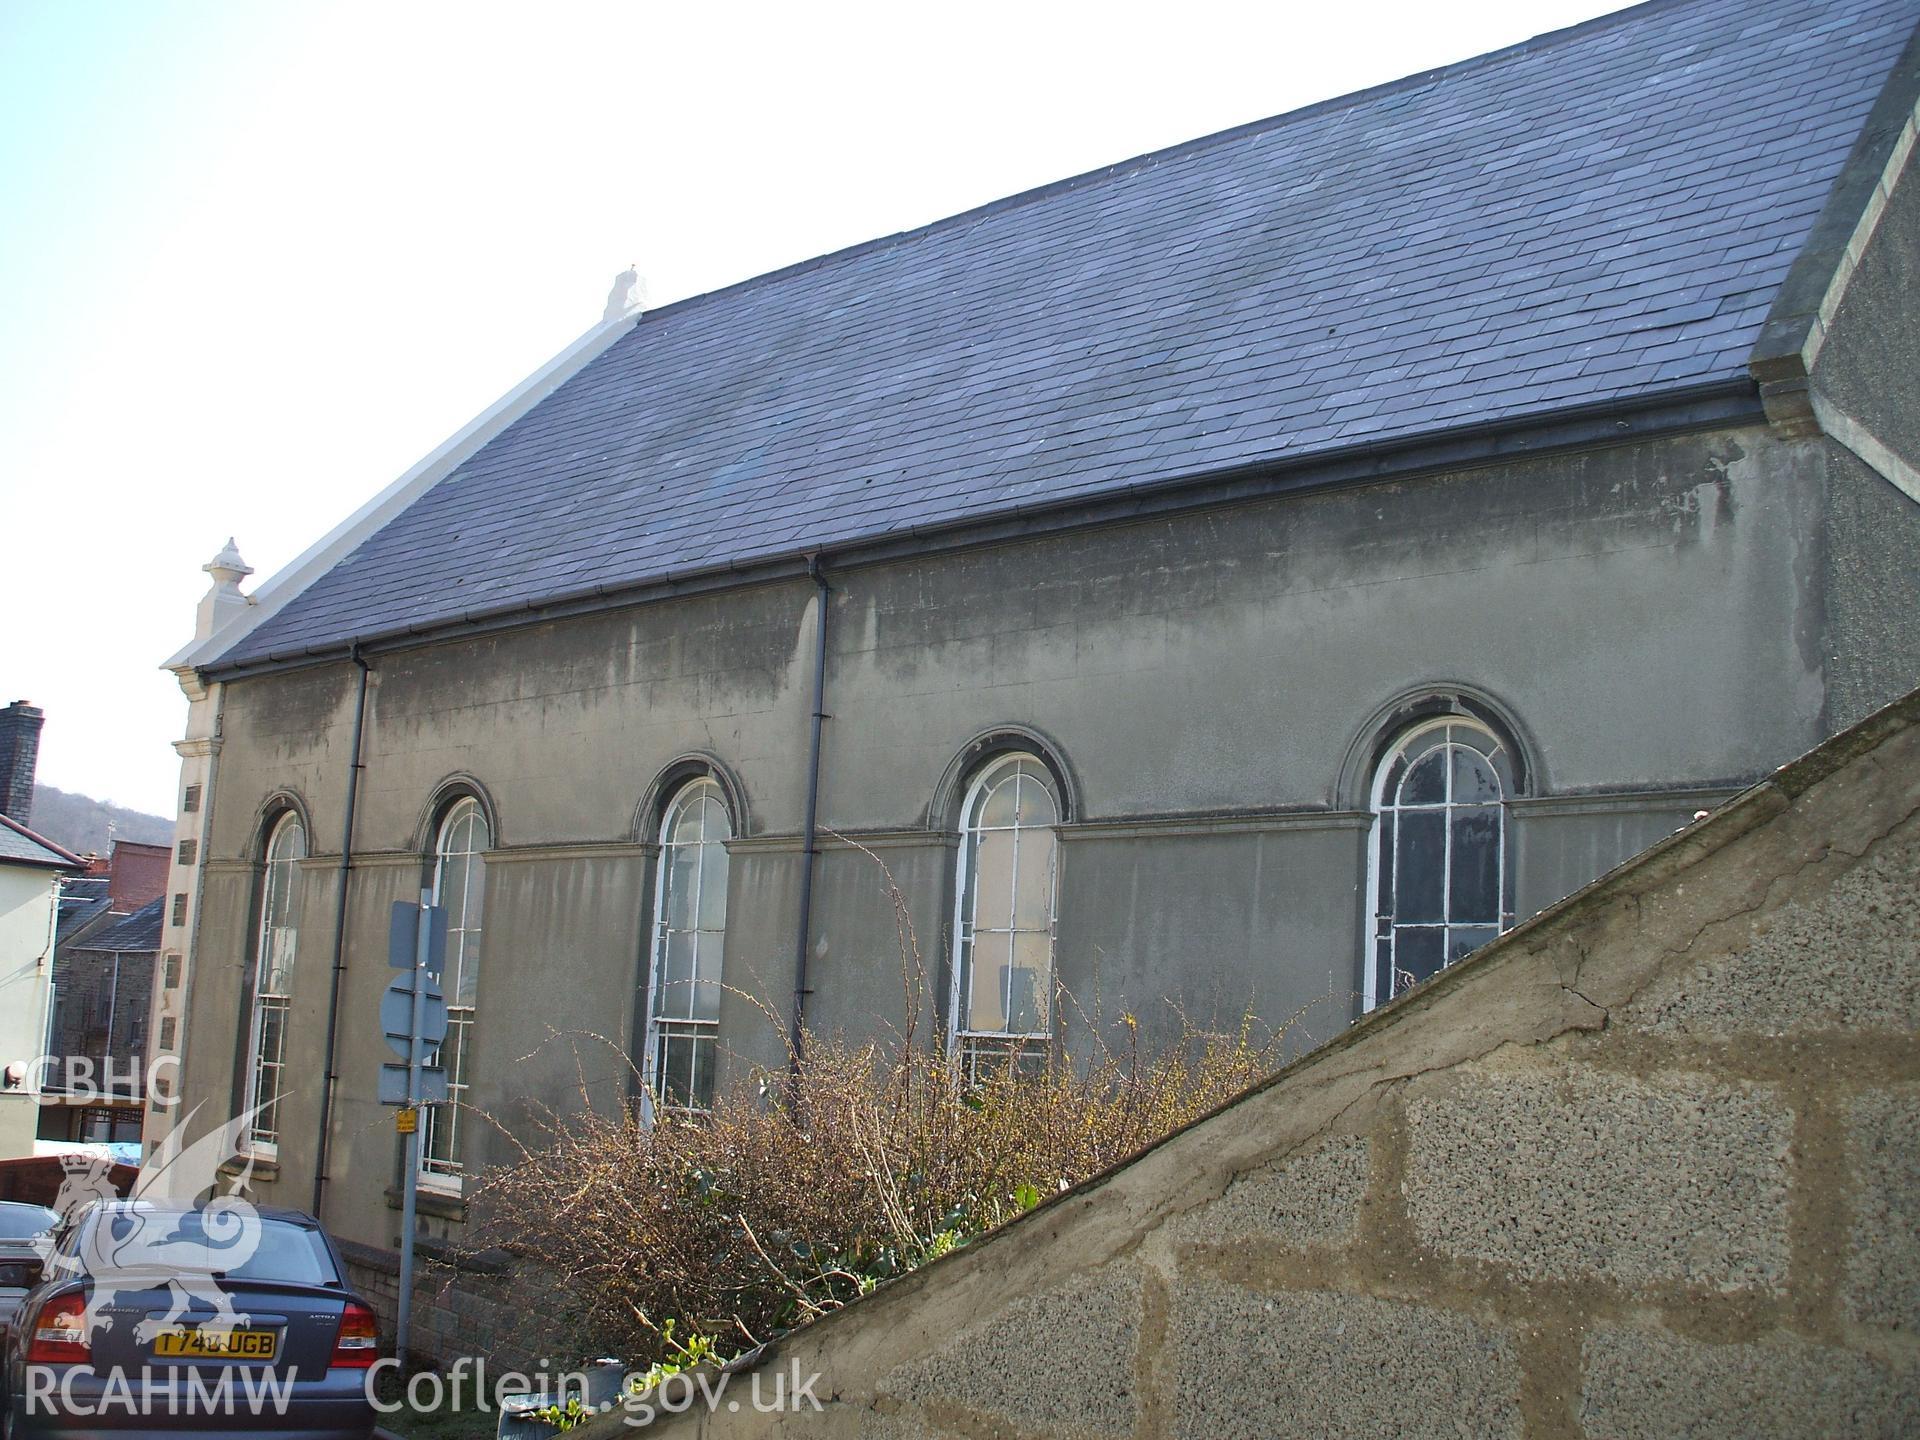 Colour digital photograph showing the exterior of the English Baptist Church, Alfred Place, Aberystwyth.